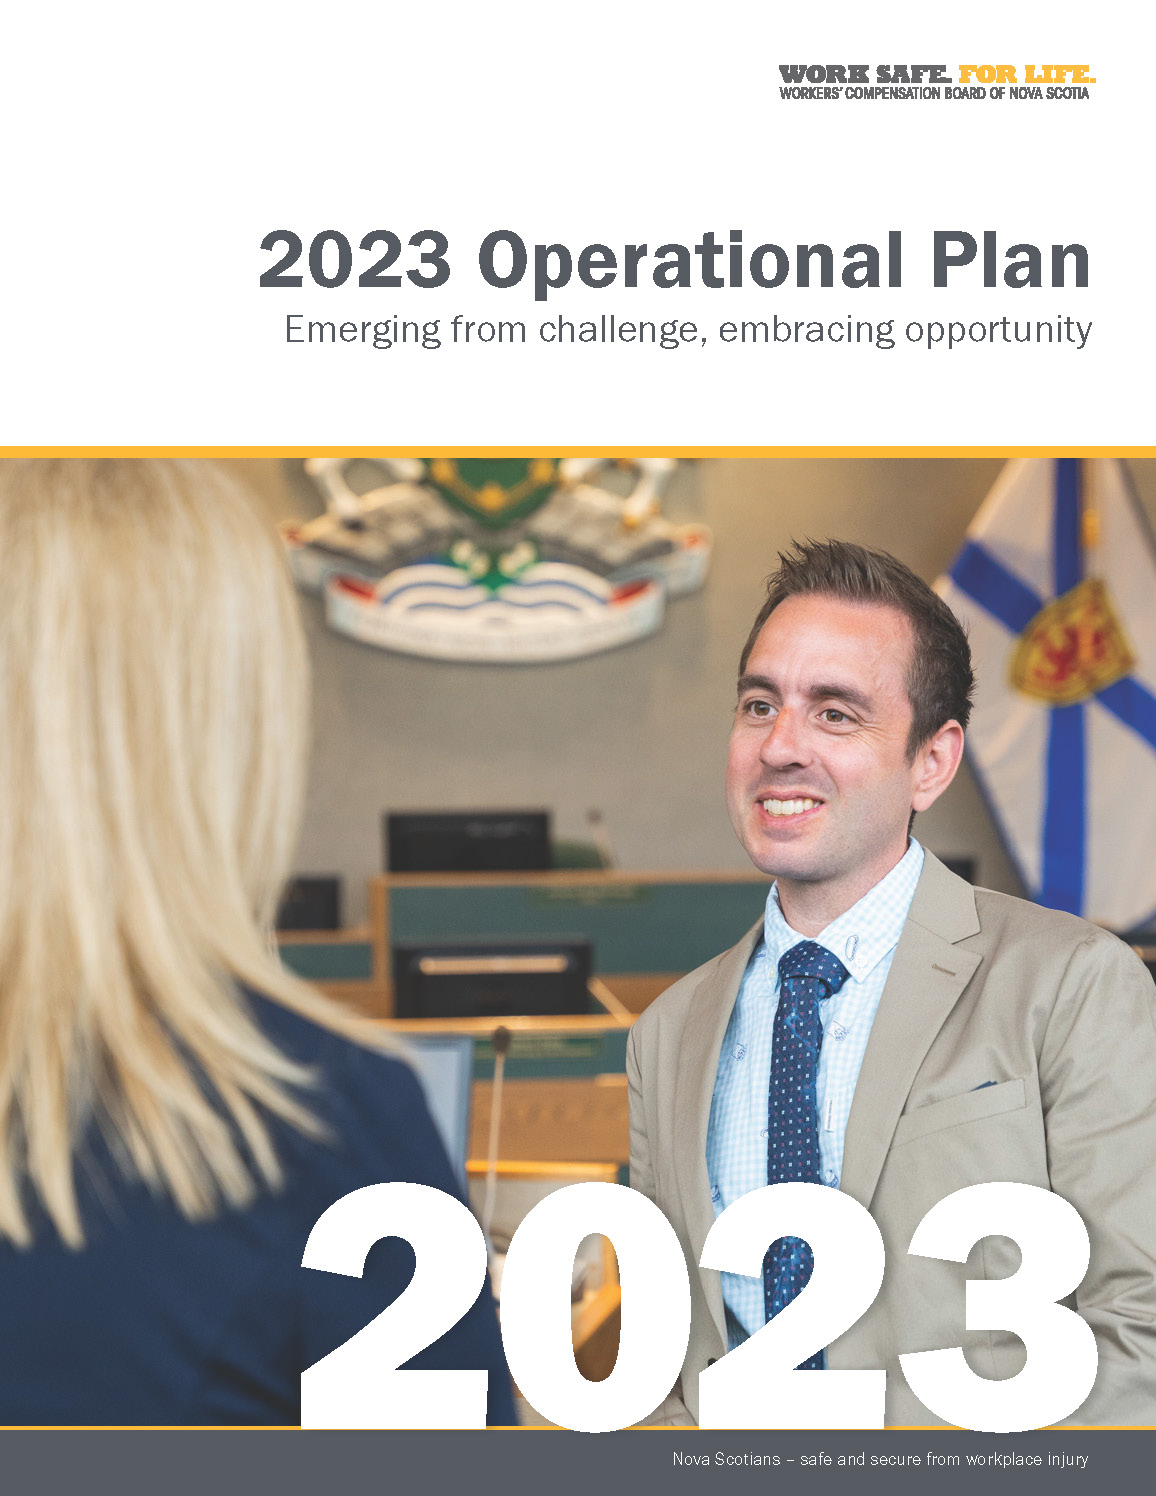 Read our most recent and past Operational Plans.